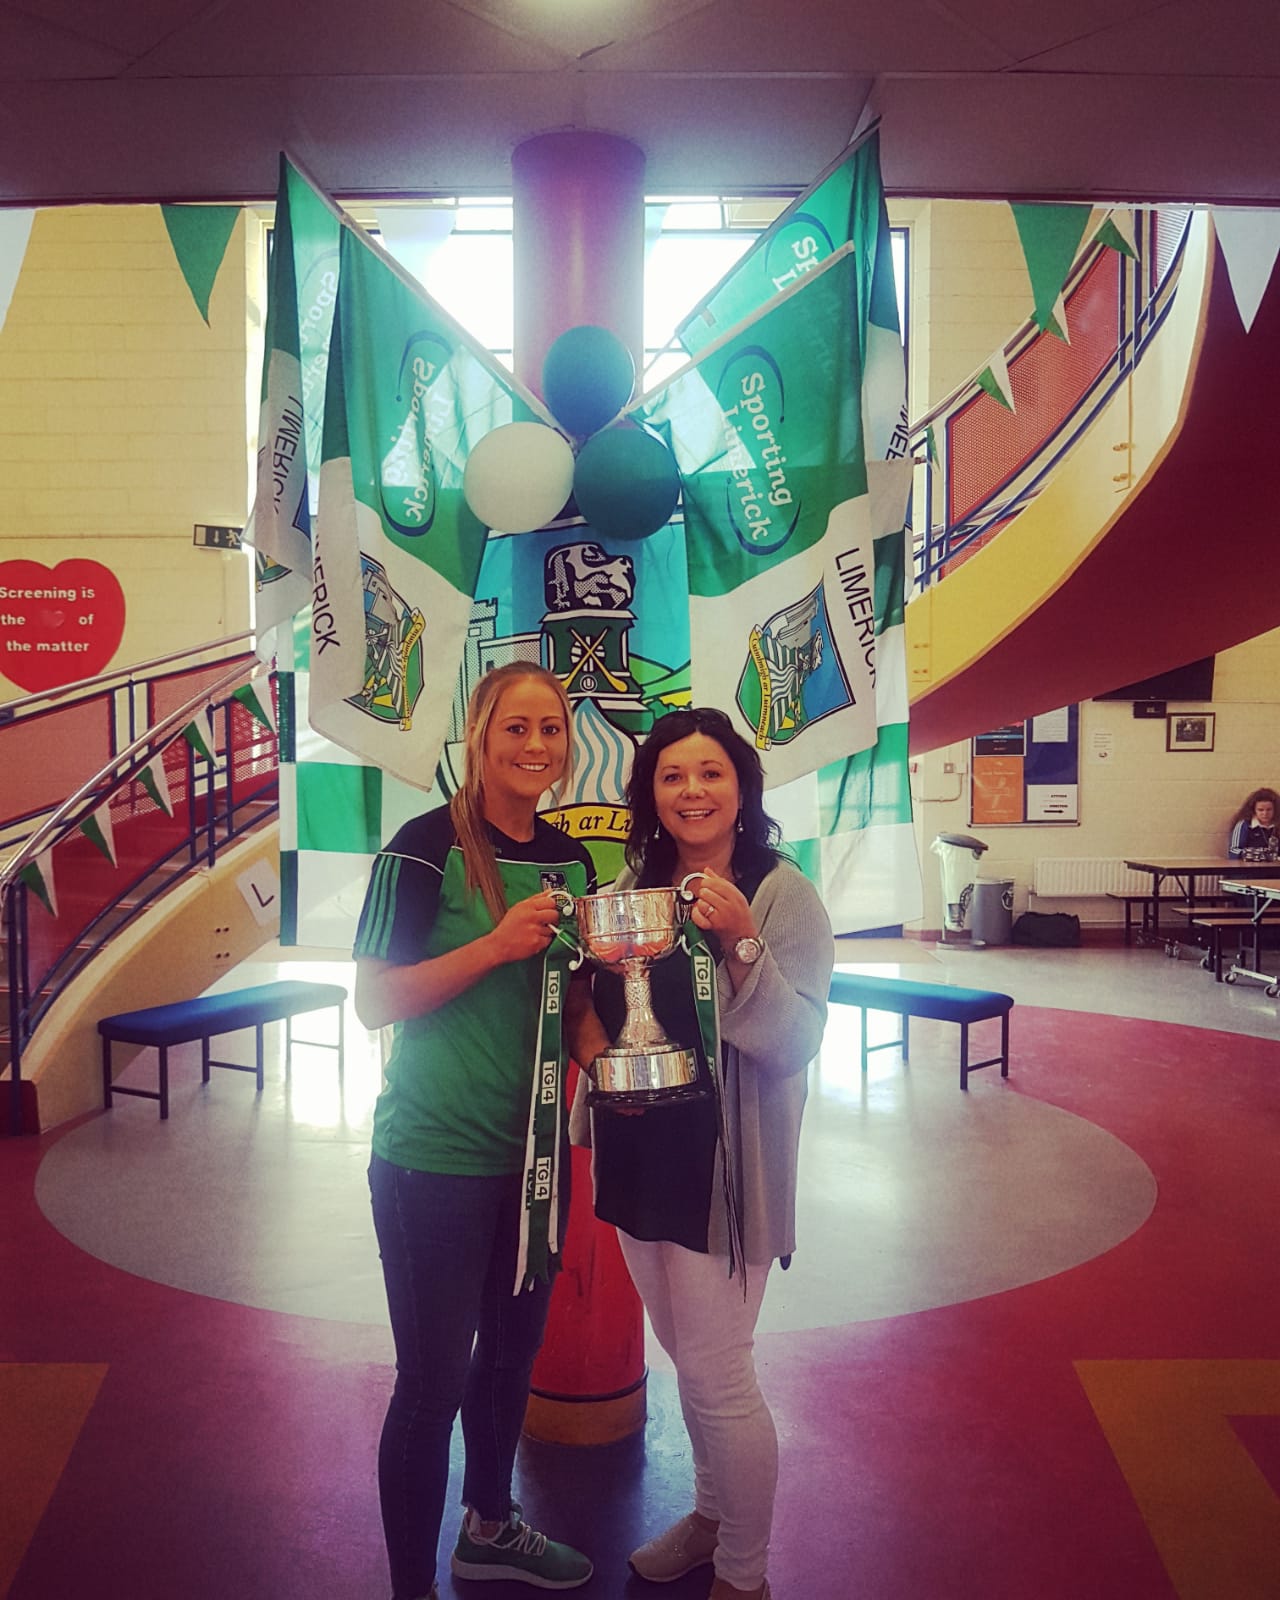 Desmond College and Colaiste are visited by All Ireland Football Champions and past pupils, Catriona Davis and Rebecca Delee